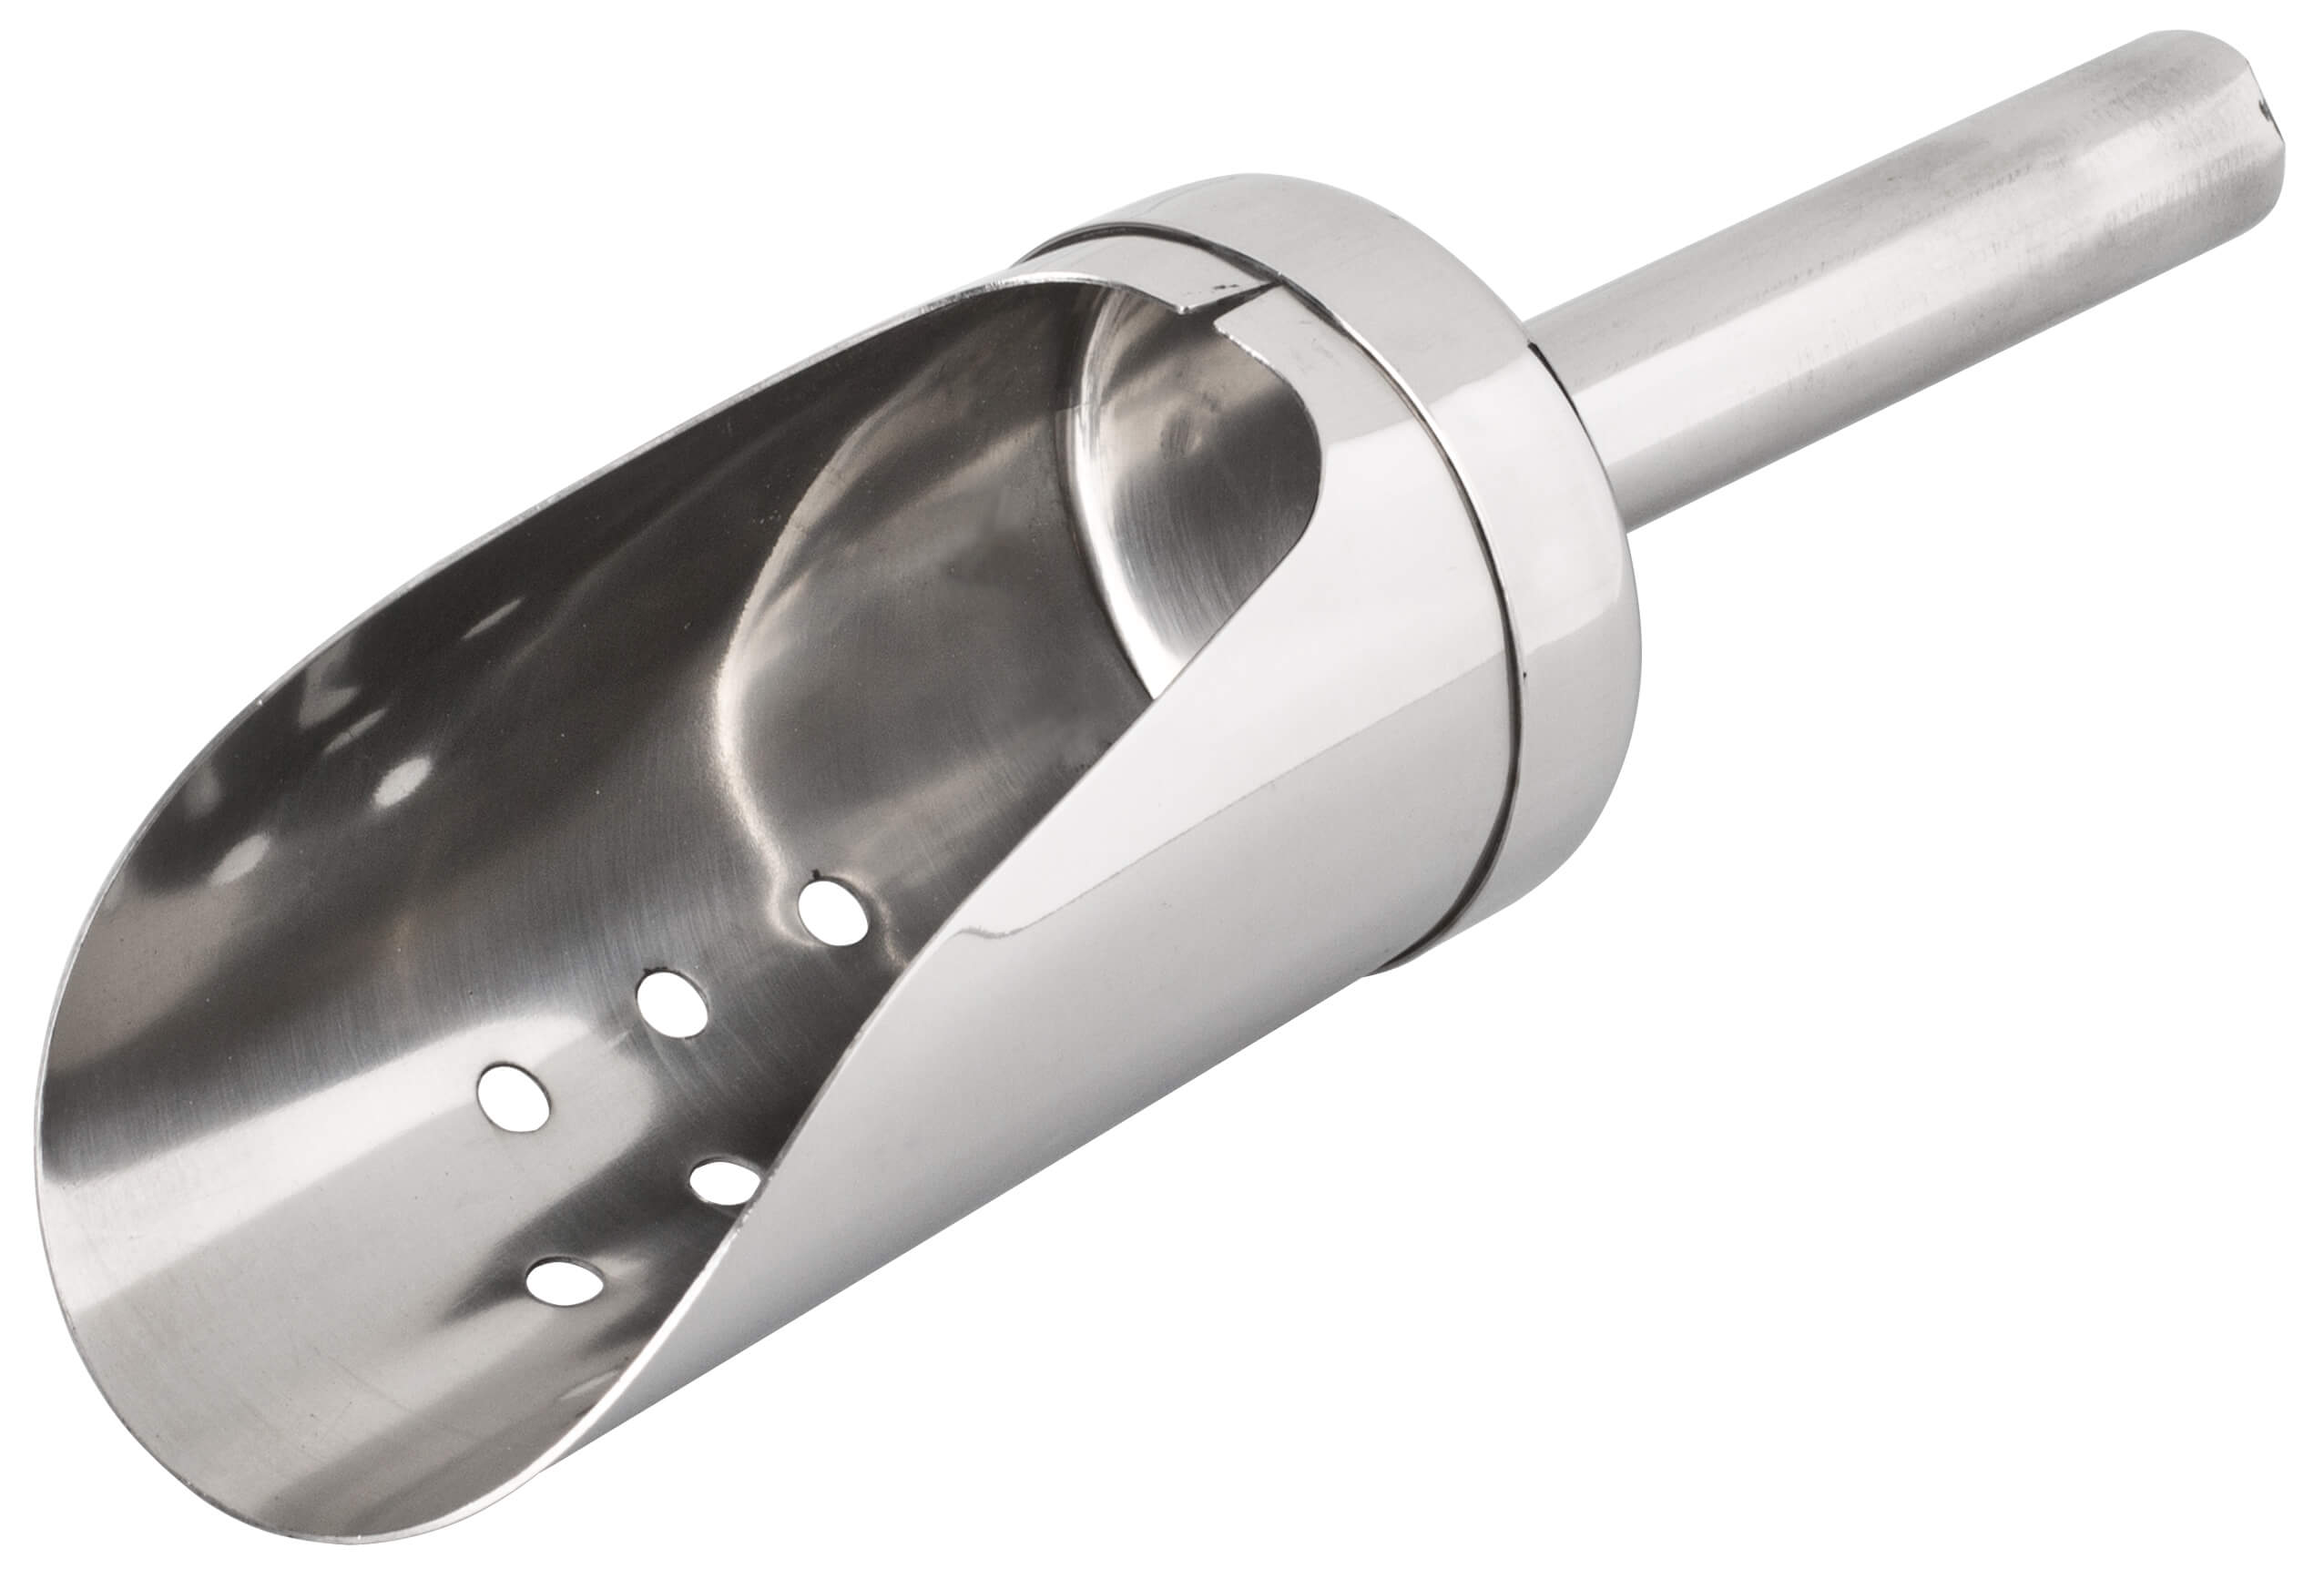 Ice scoop - stainless steel, punched